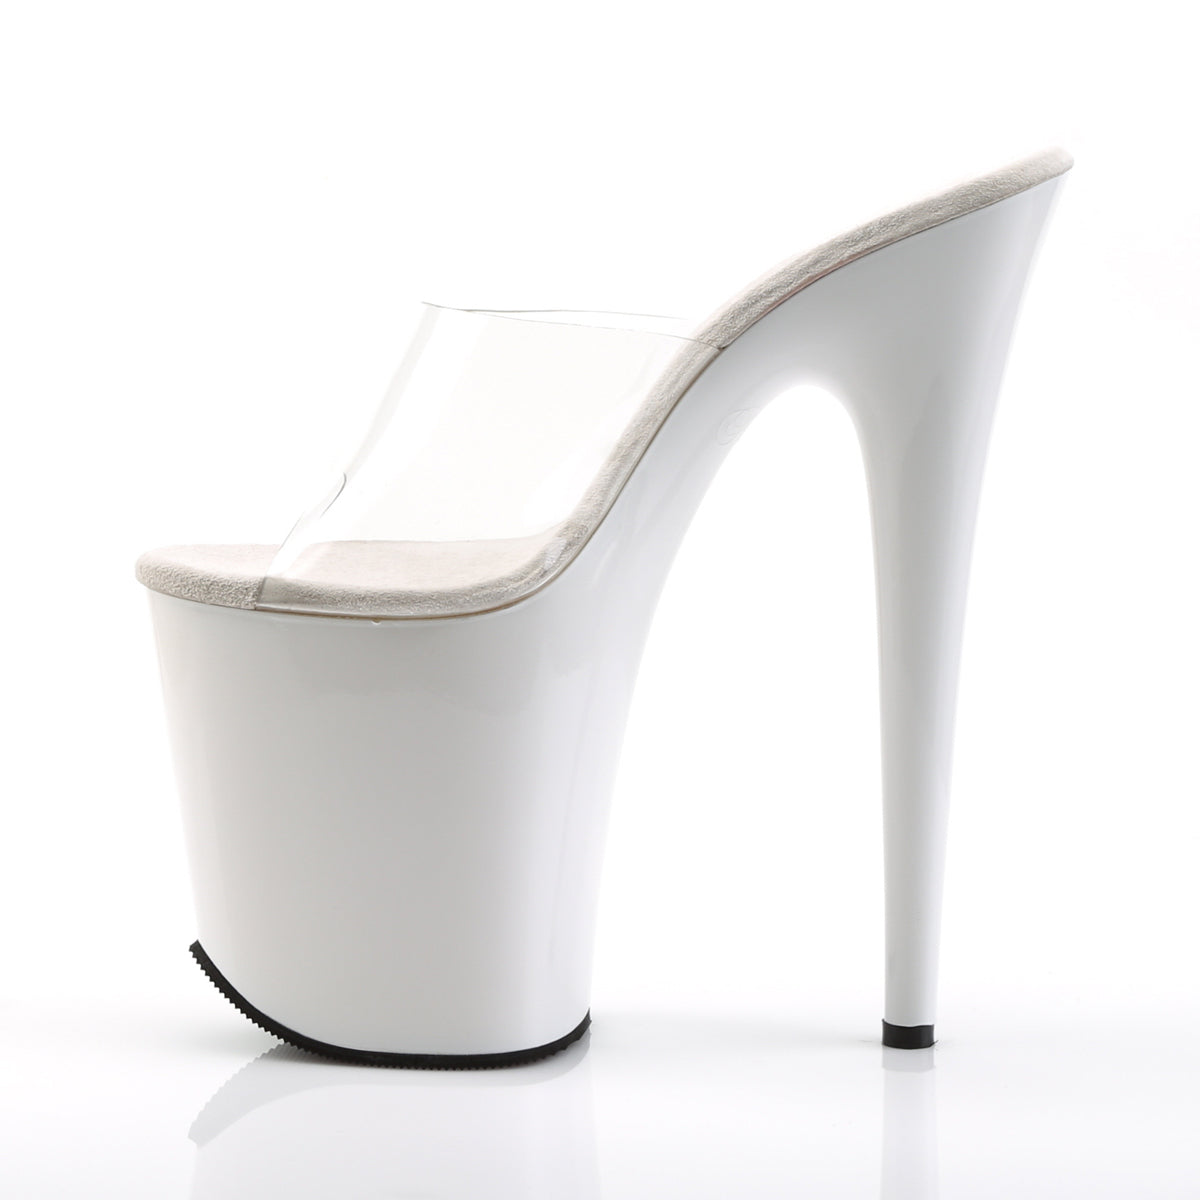 FLAMINGO-801 8" Heel Clear and White Pole Dancing Platforms-Pleaser- Sexy Shoes Pole Dance Heels